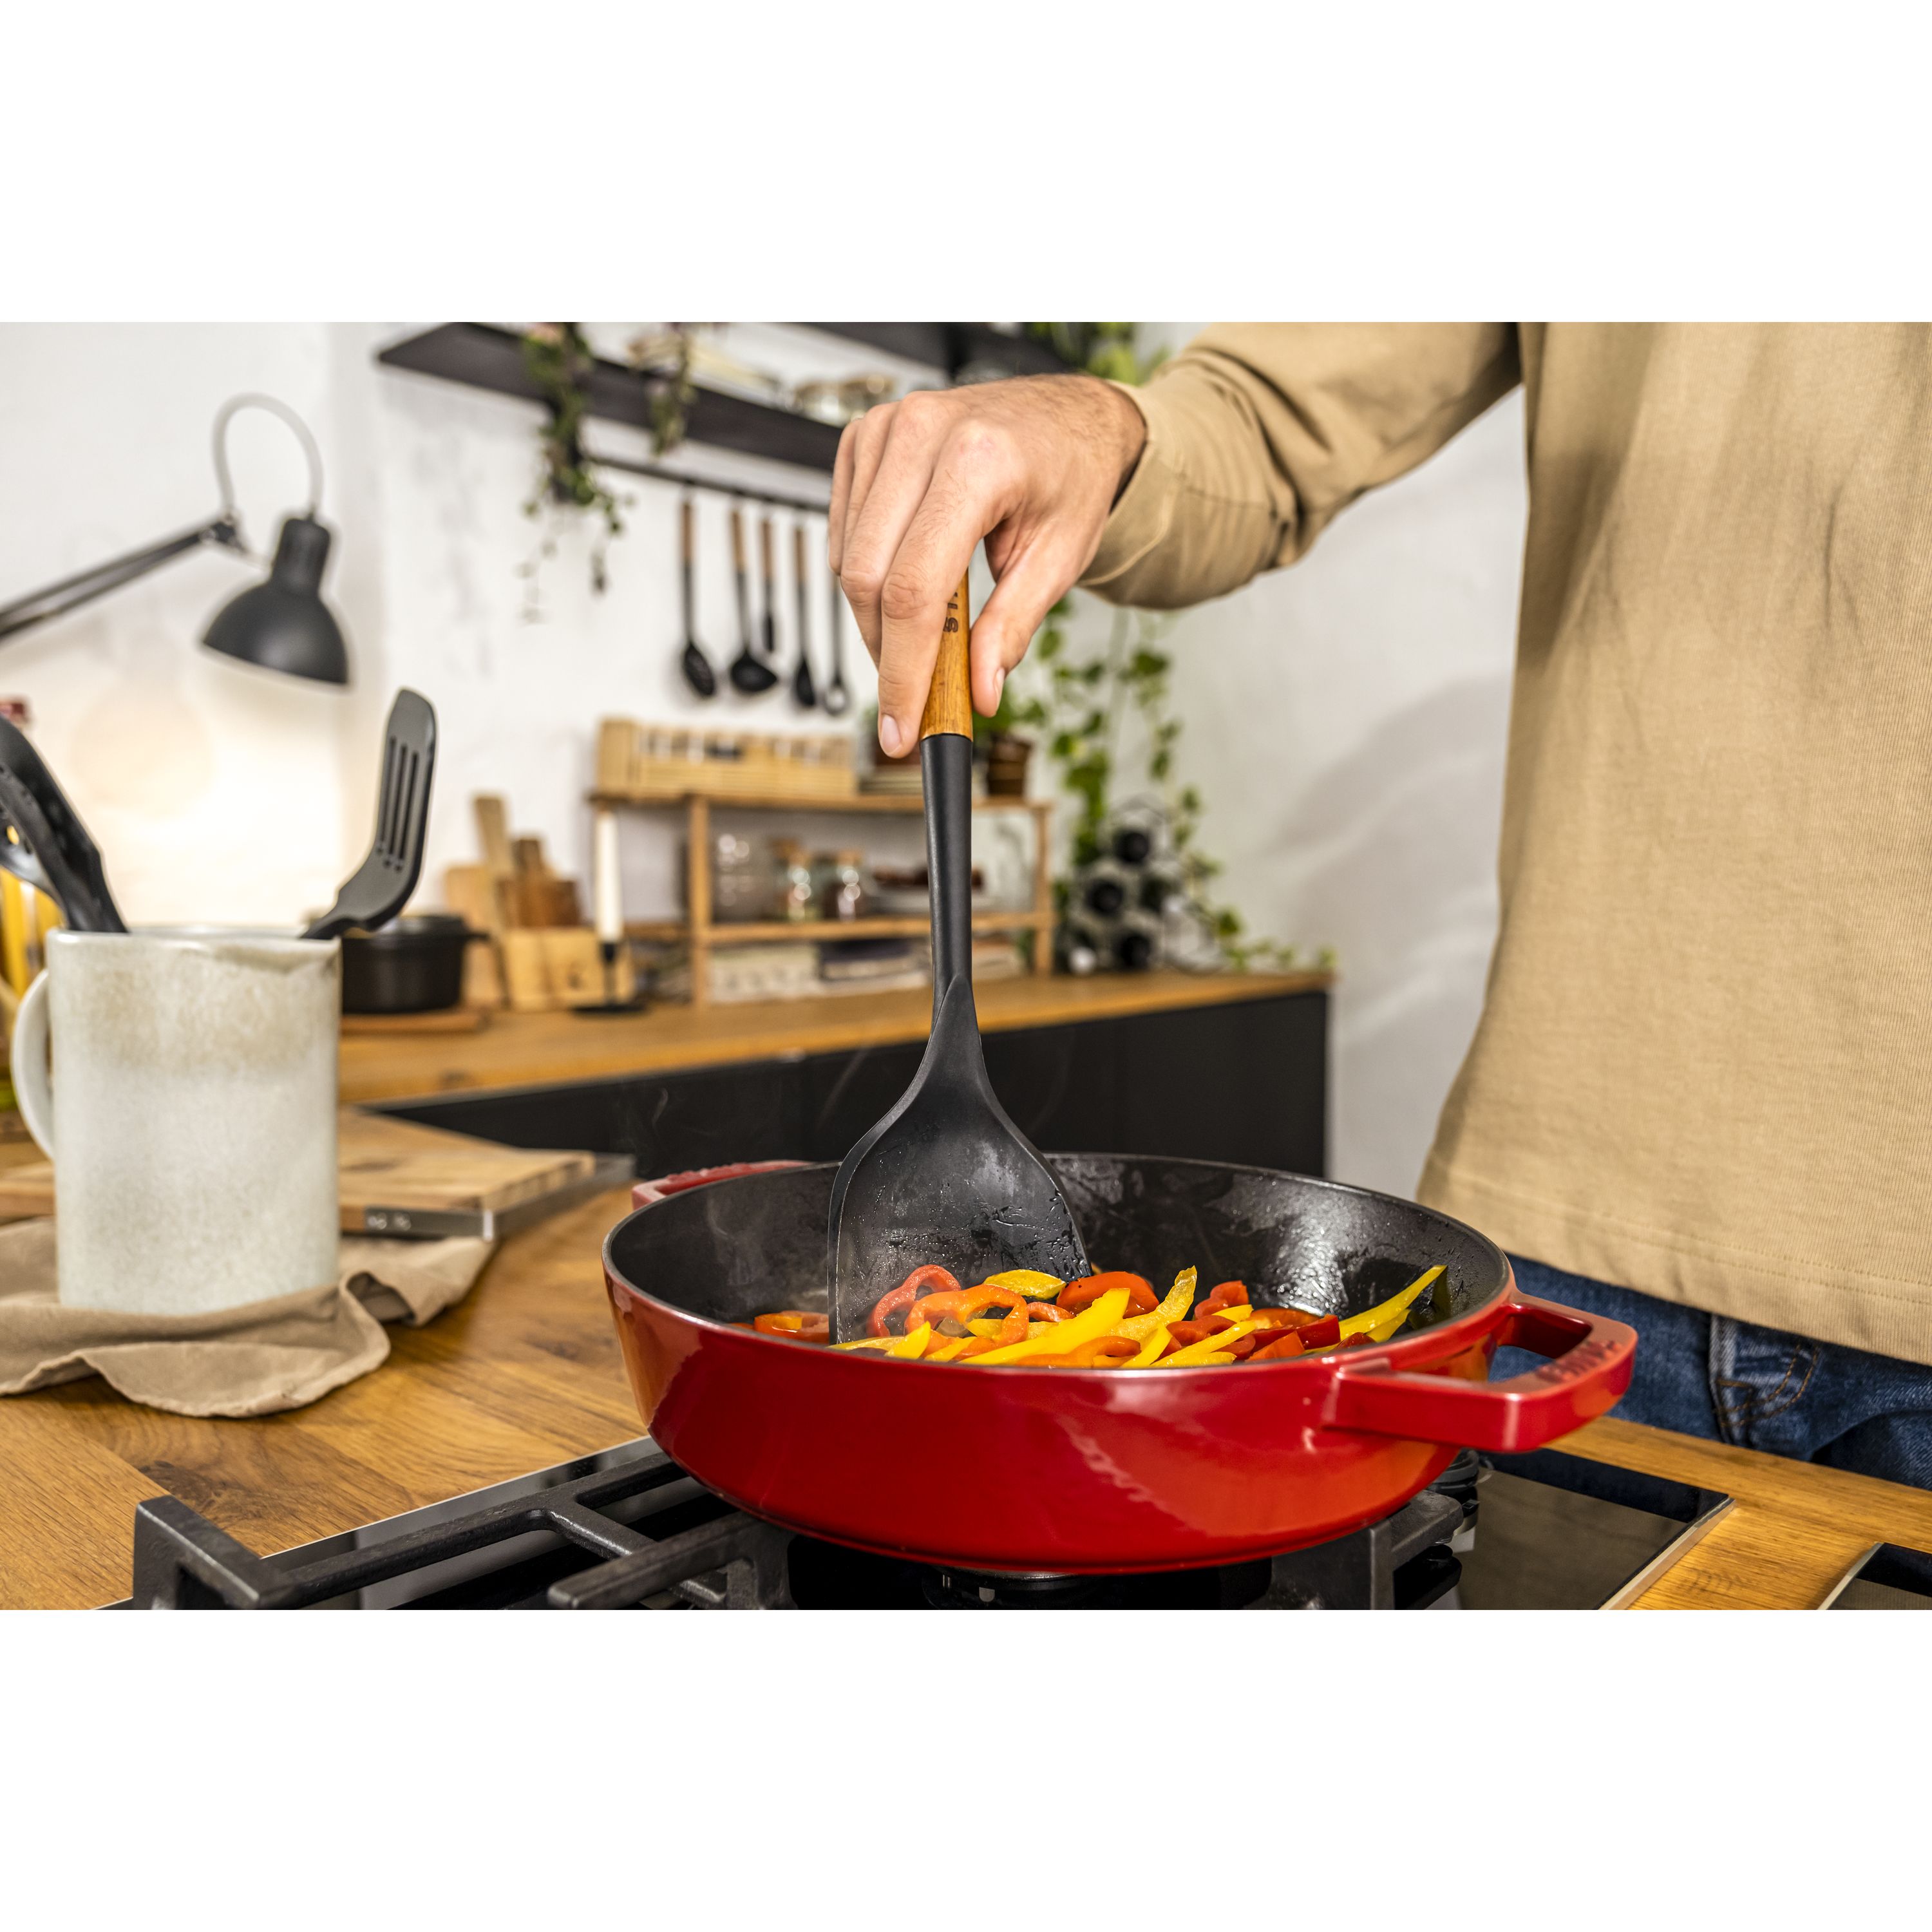 Staub Silicone With Wood Handle Cooking Utensil, Wok Turner